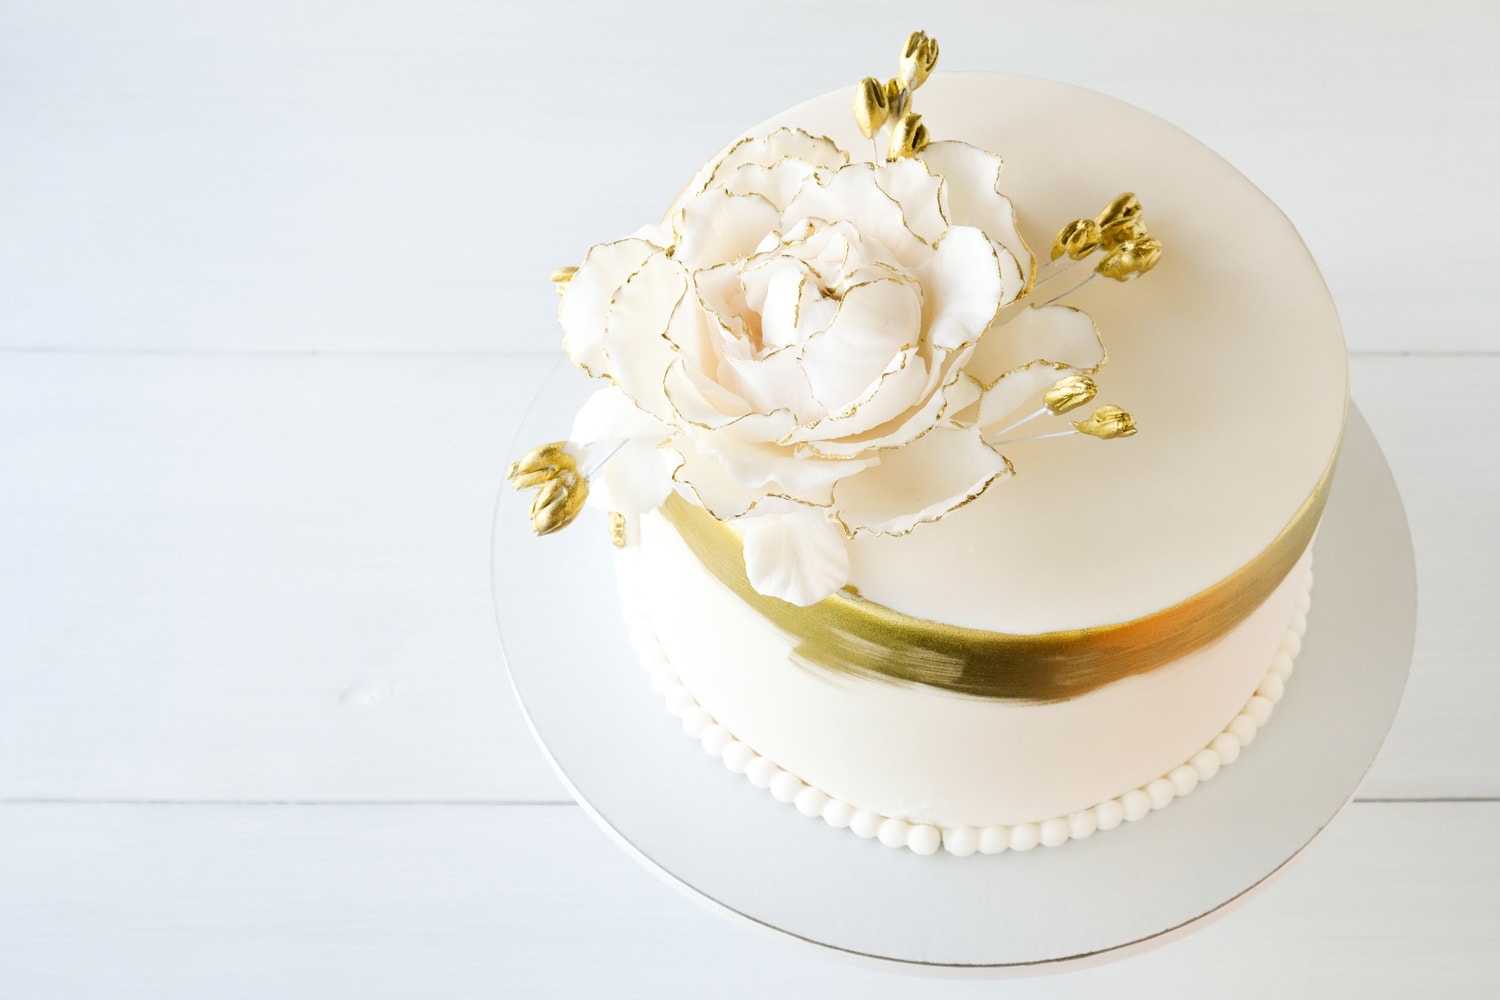 White wedding cake decorated with gold flowers on a white background.